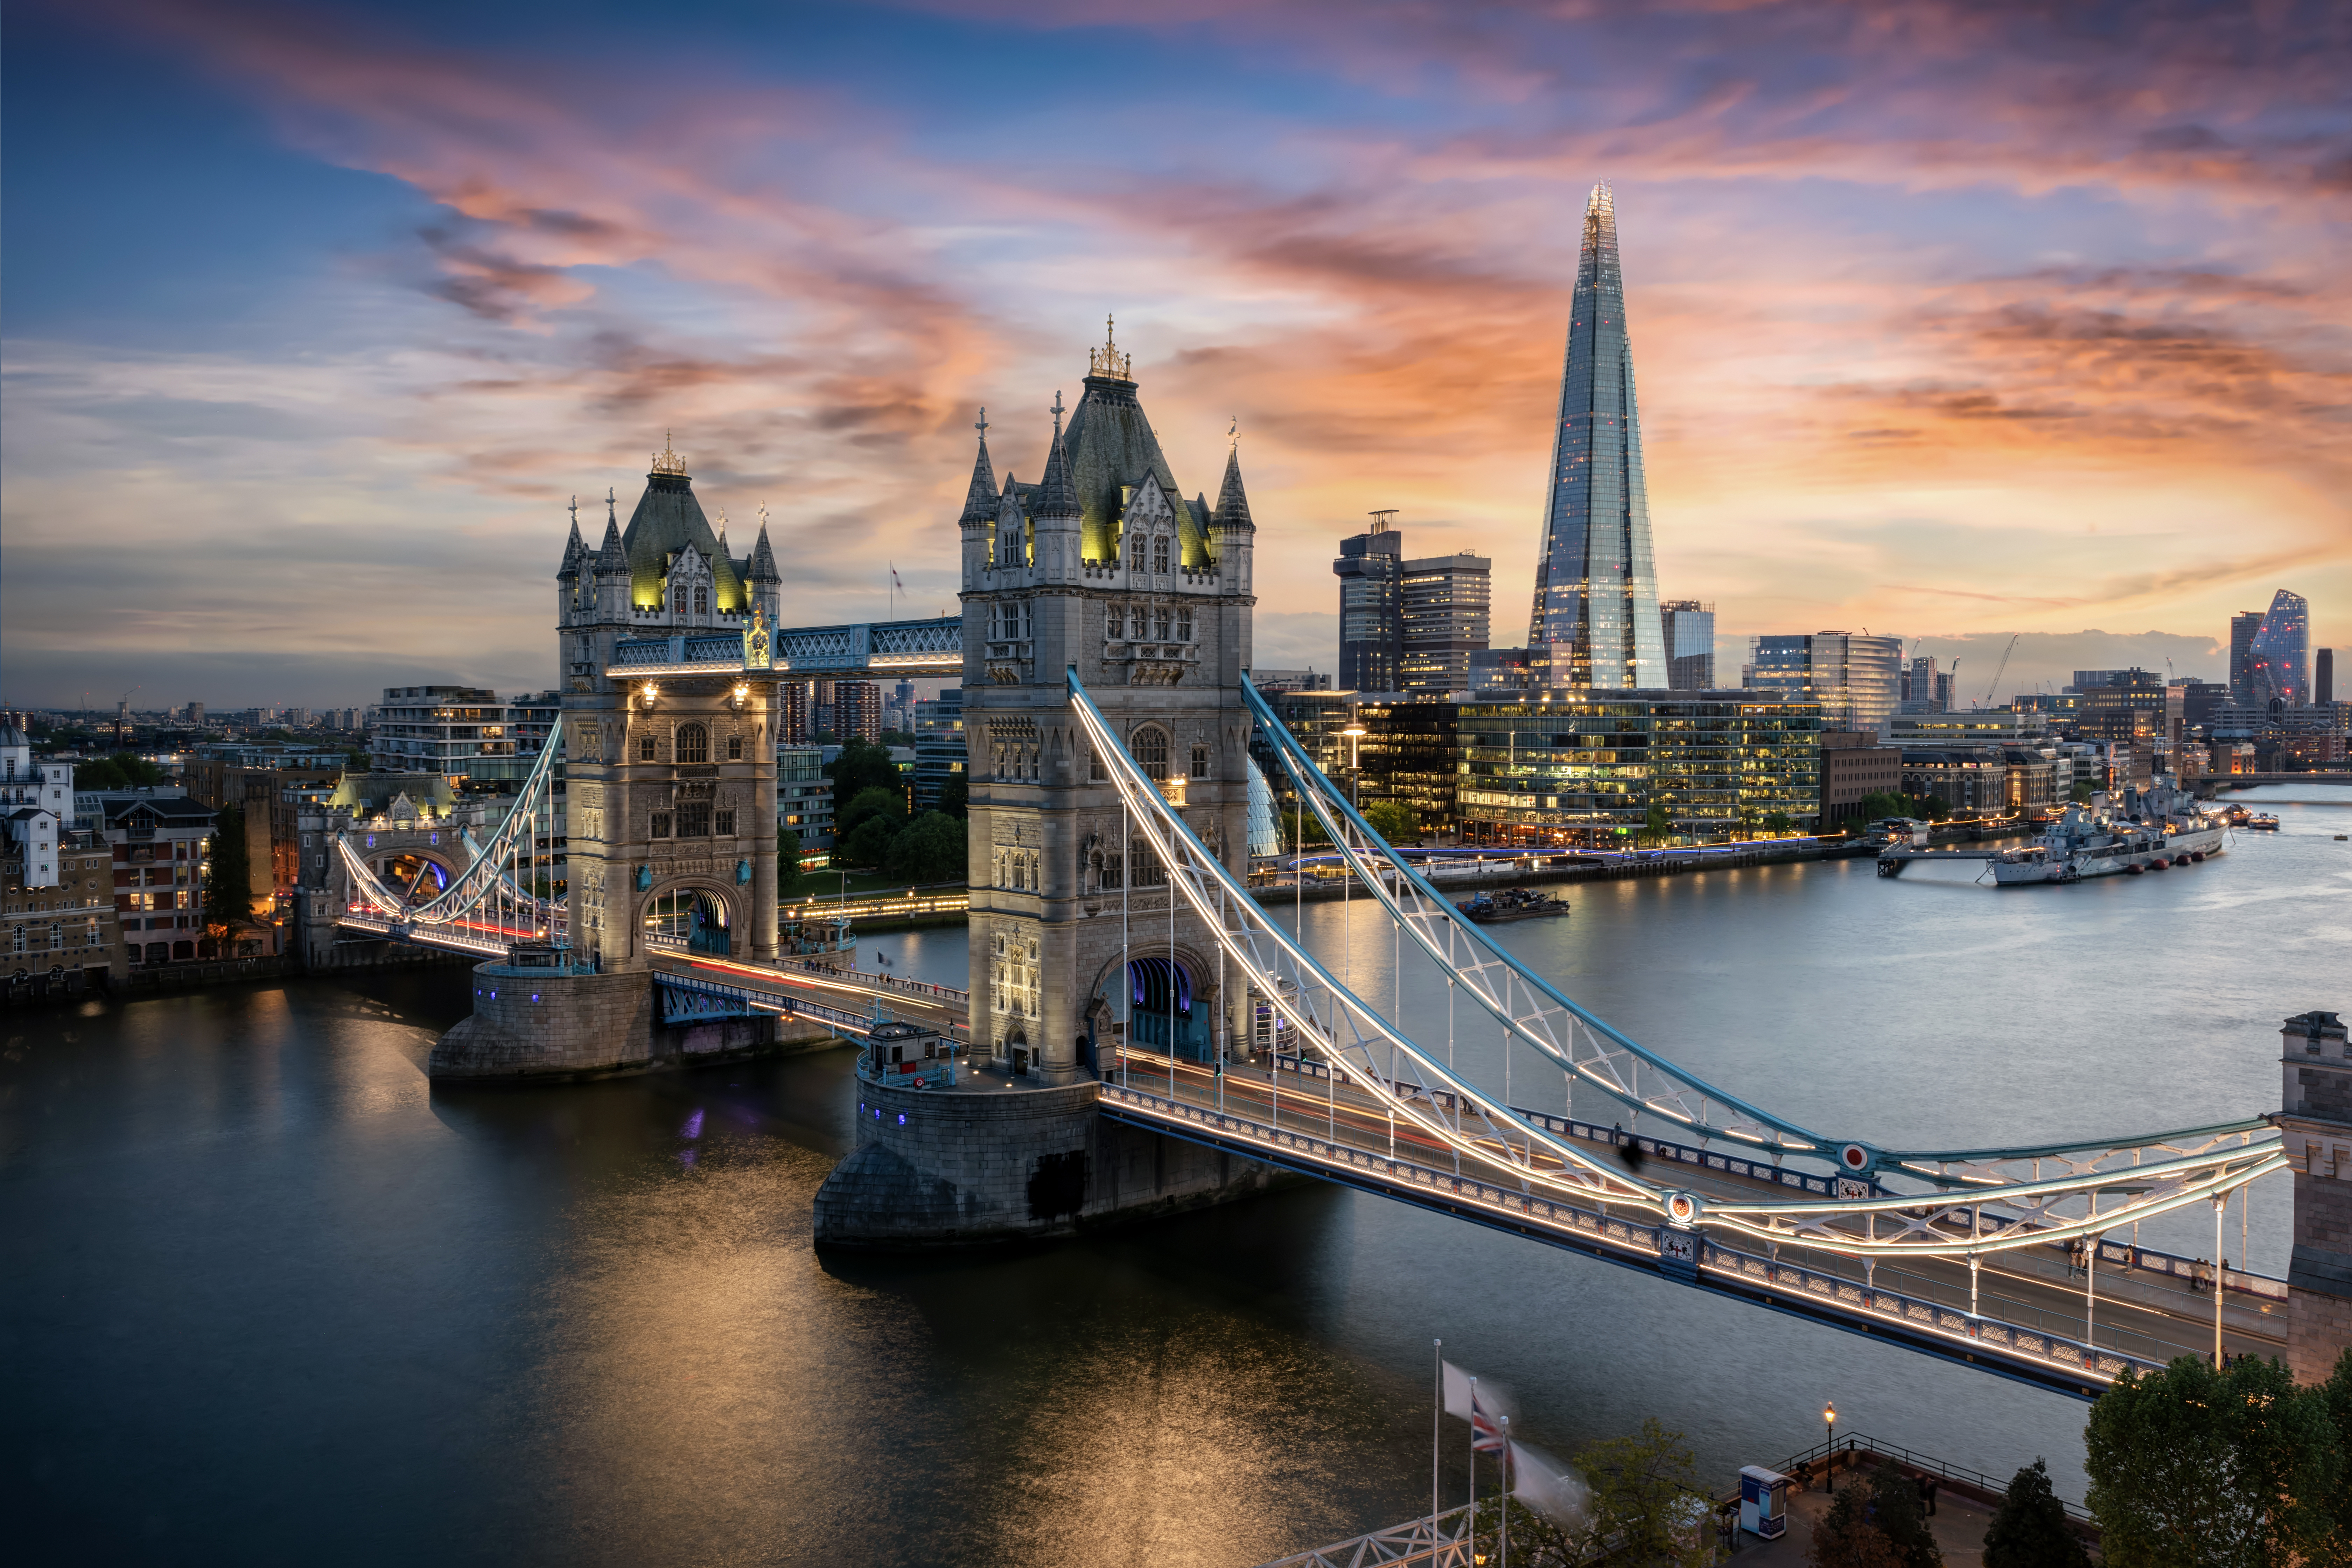 London, founded by the Romans almost 2000 years ago, is now one of the world's most important cities. The city is home to many world heritage sites, so a trip there will take you to the Palace of Westminster and Westminster Abbey, Tower Bridge and Big Ben.